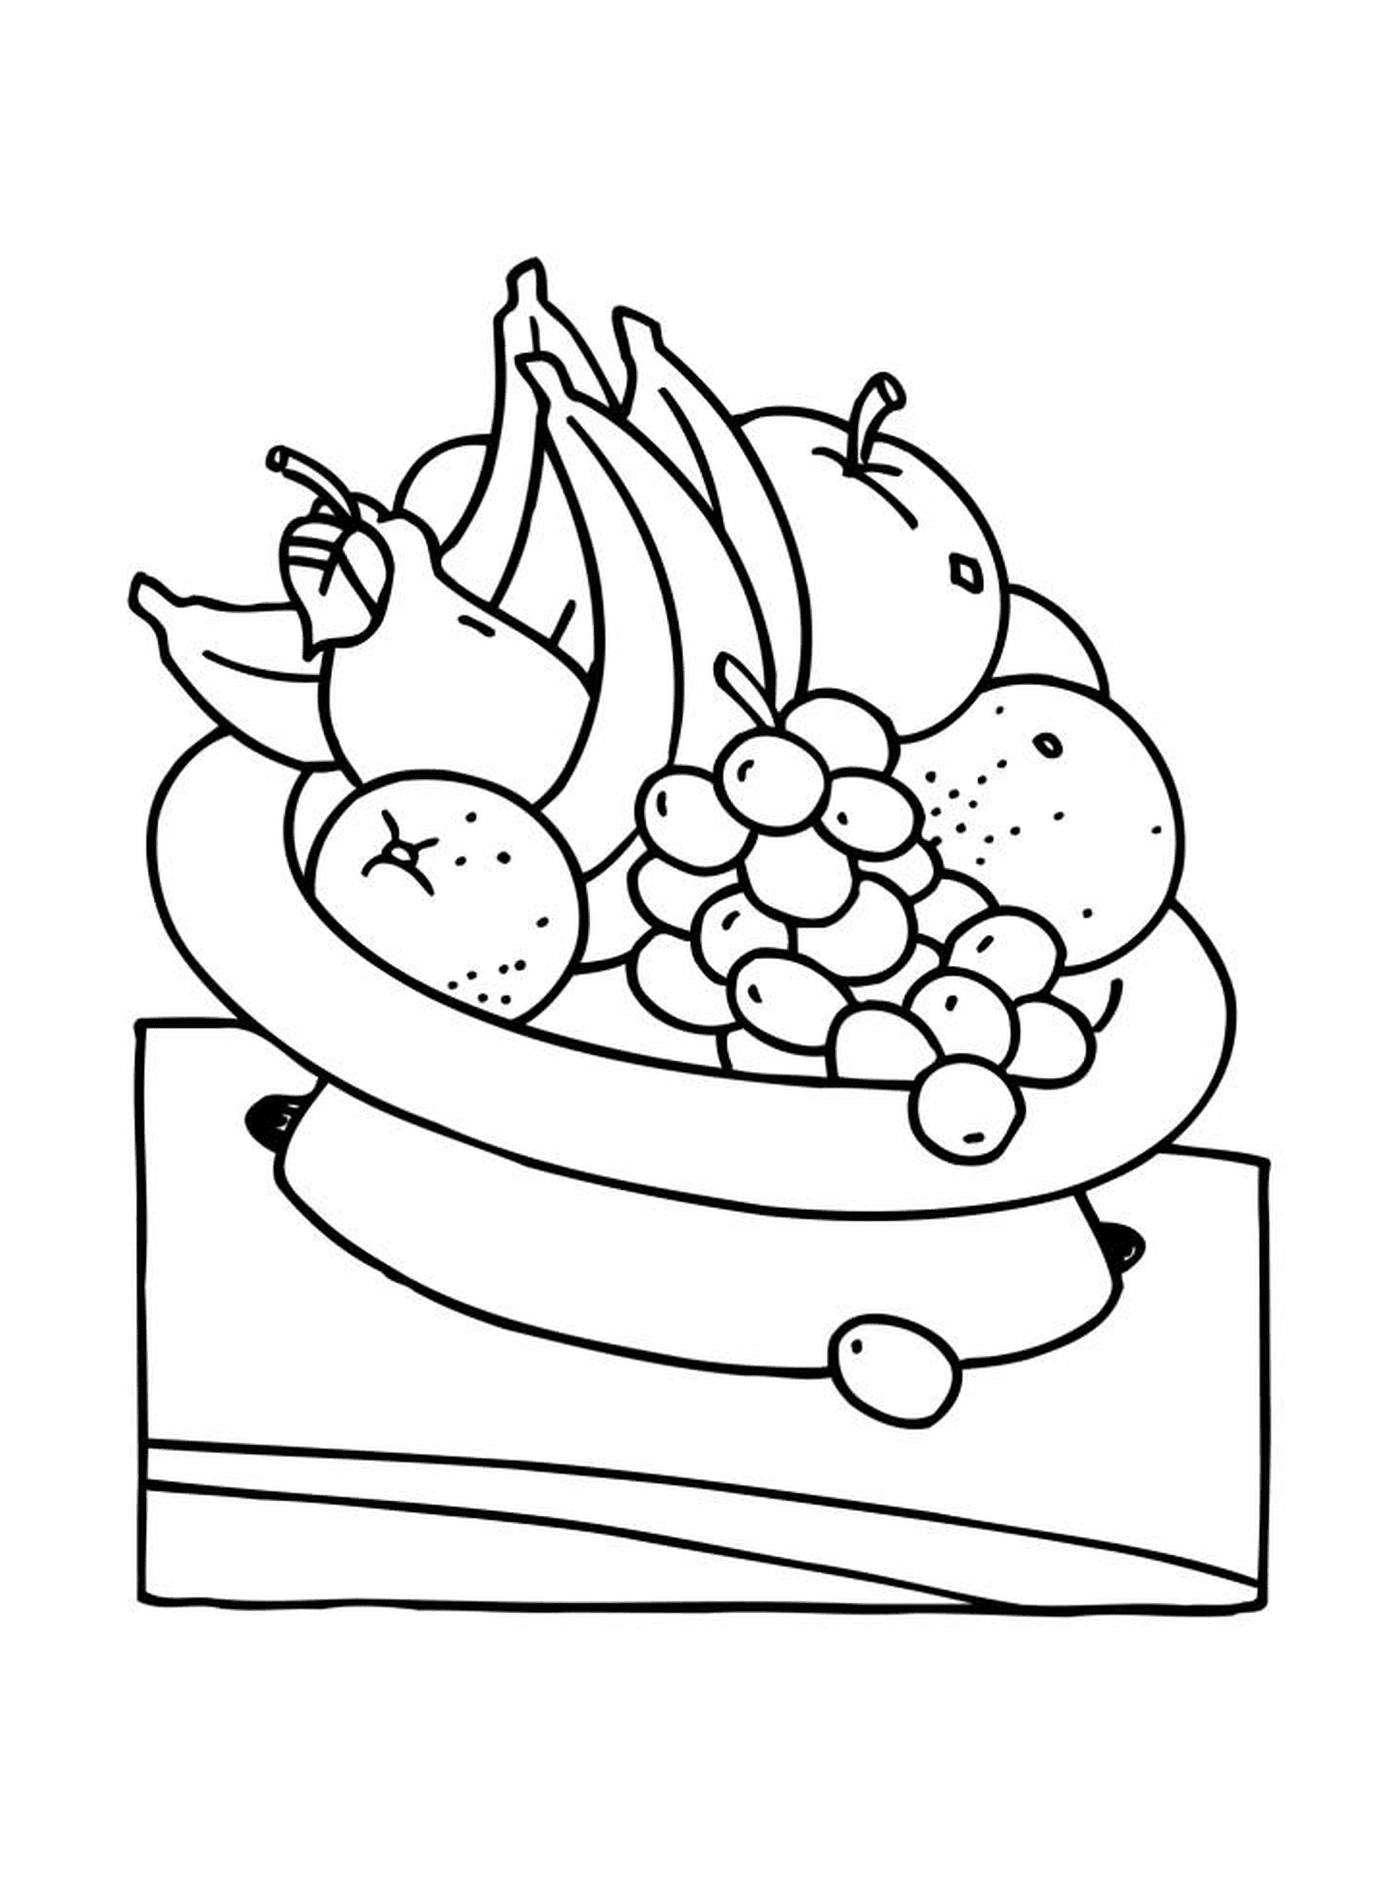  bowl filled with different fruits 